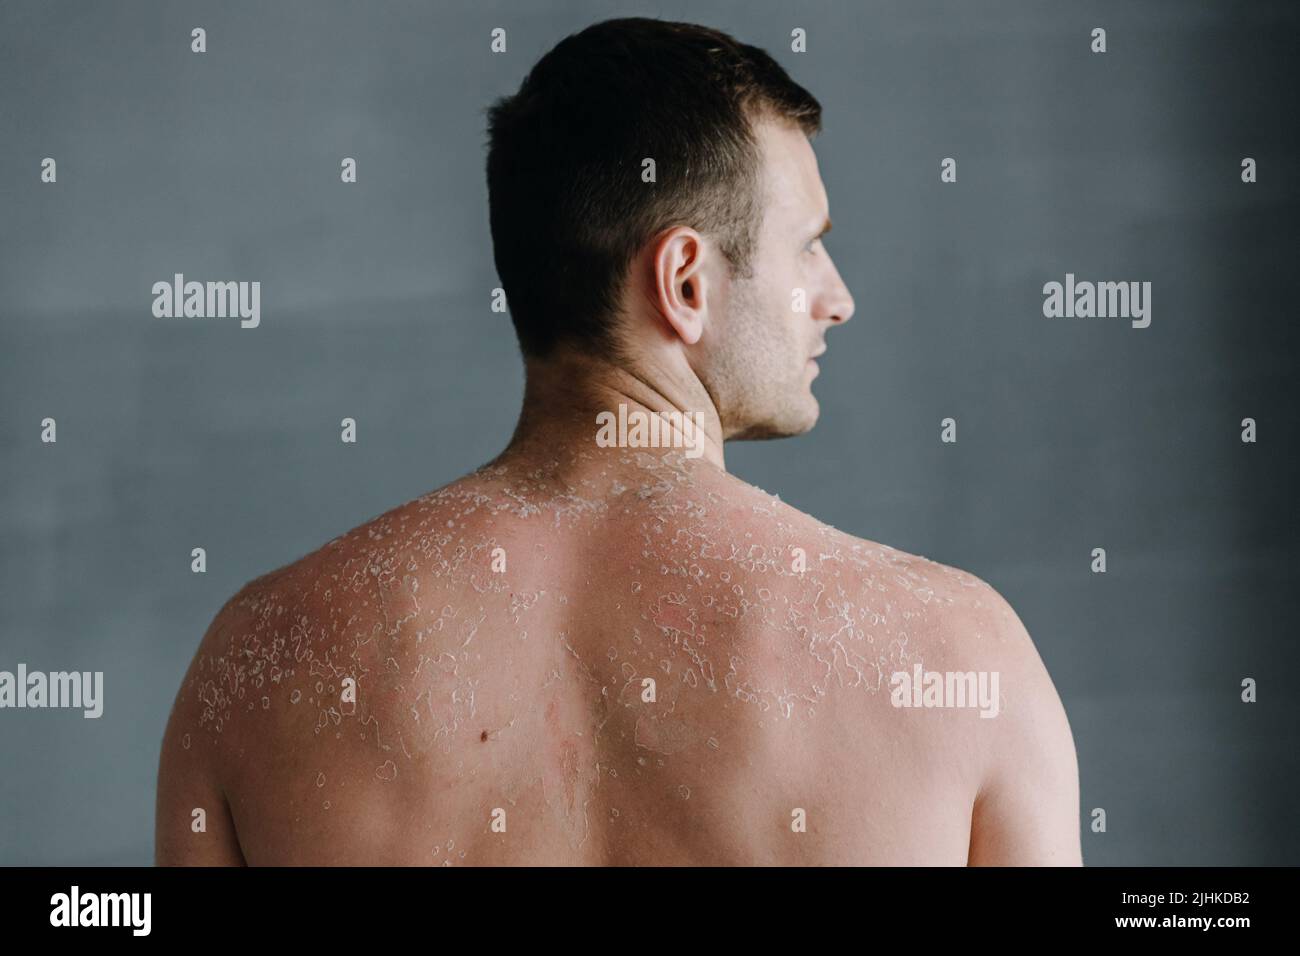 Dermatological conditions of peeling skin on man's back and shoulders Stock Photo